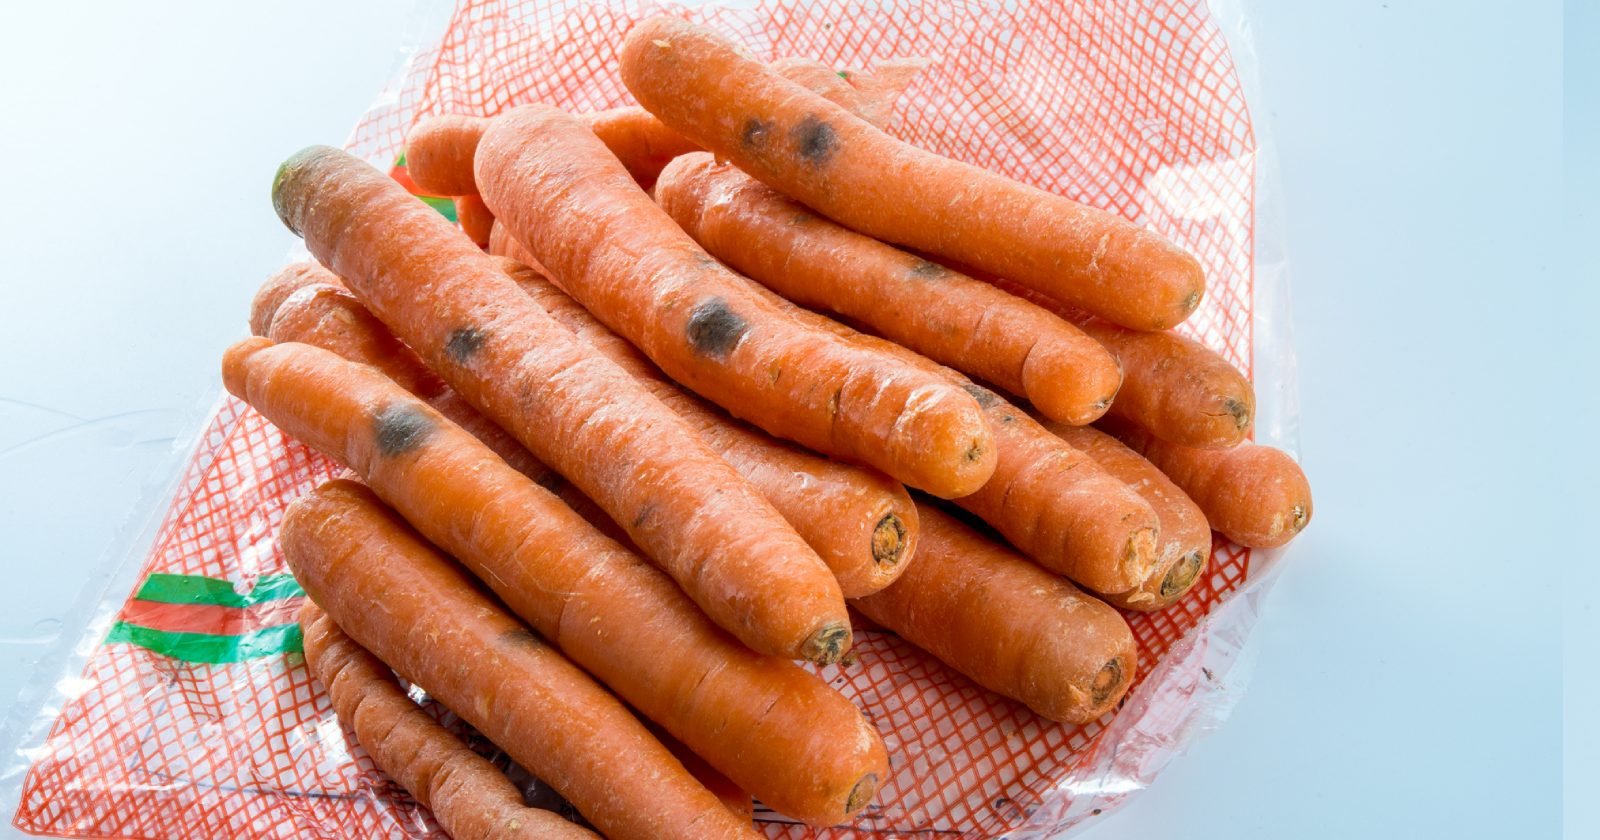 what-is-the-white-stuff-on-carrots